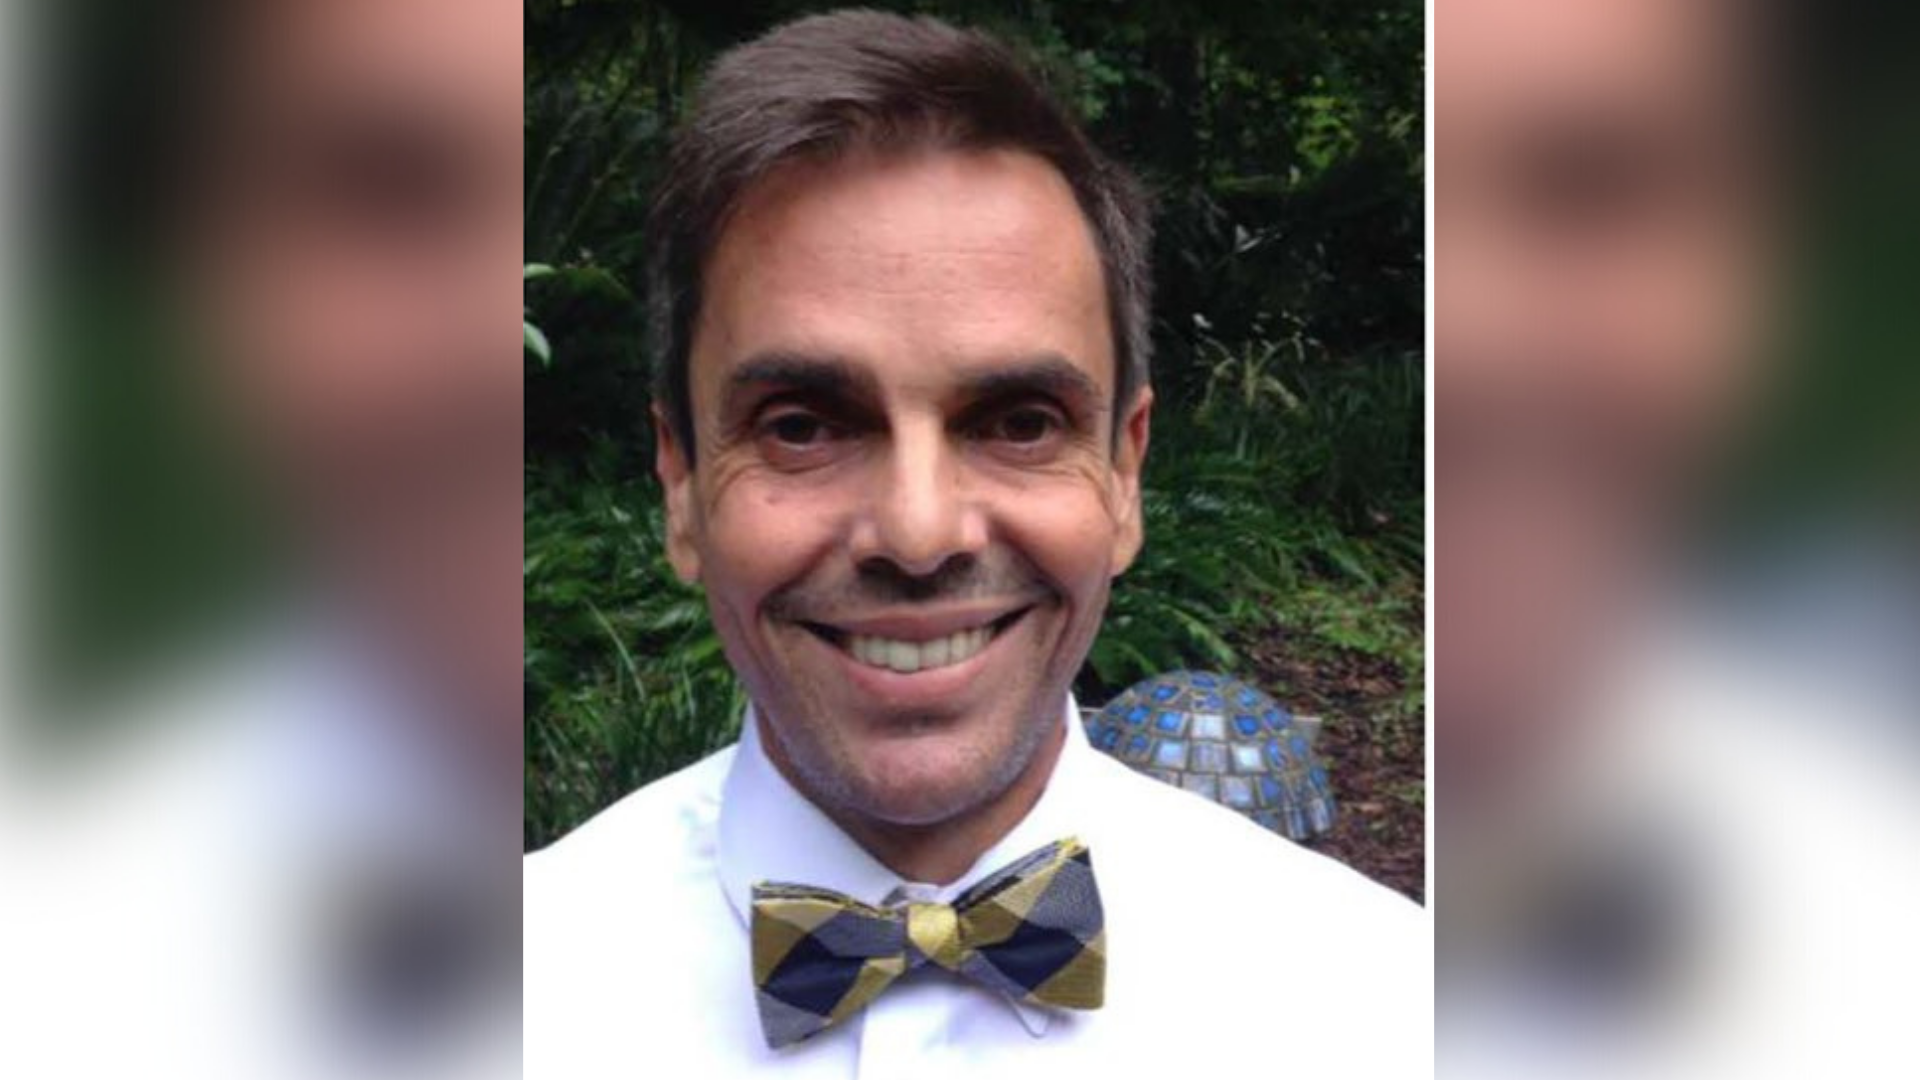 Jorge Diaz-Johnston was among the activists who sued Miami-Dade County against its ban on same-sex marriage in 2014